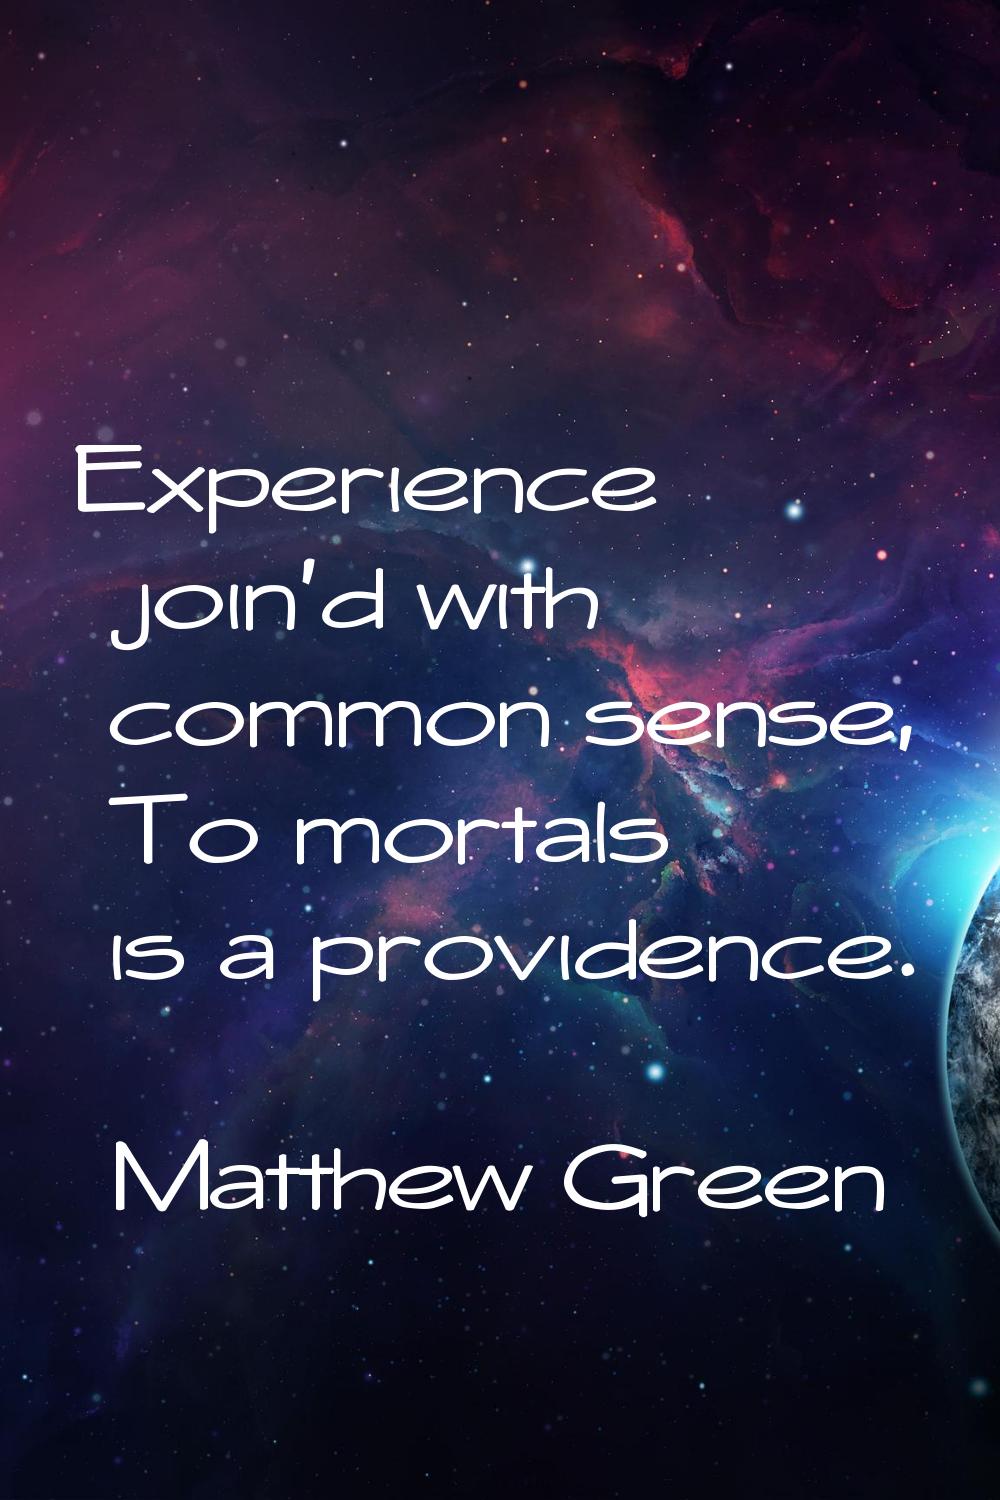 Experience join'd with common sense, To mortals is a providence.